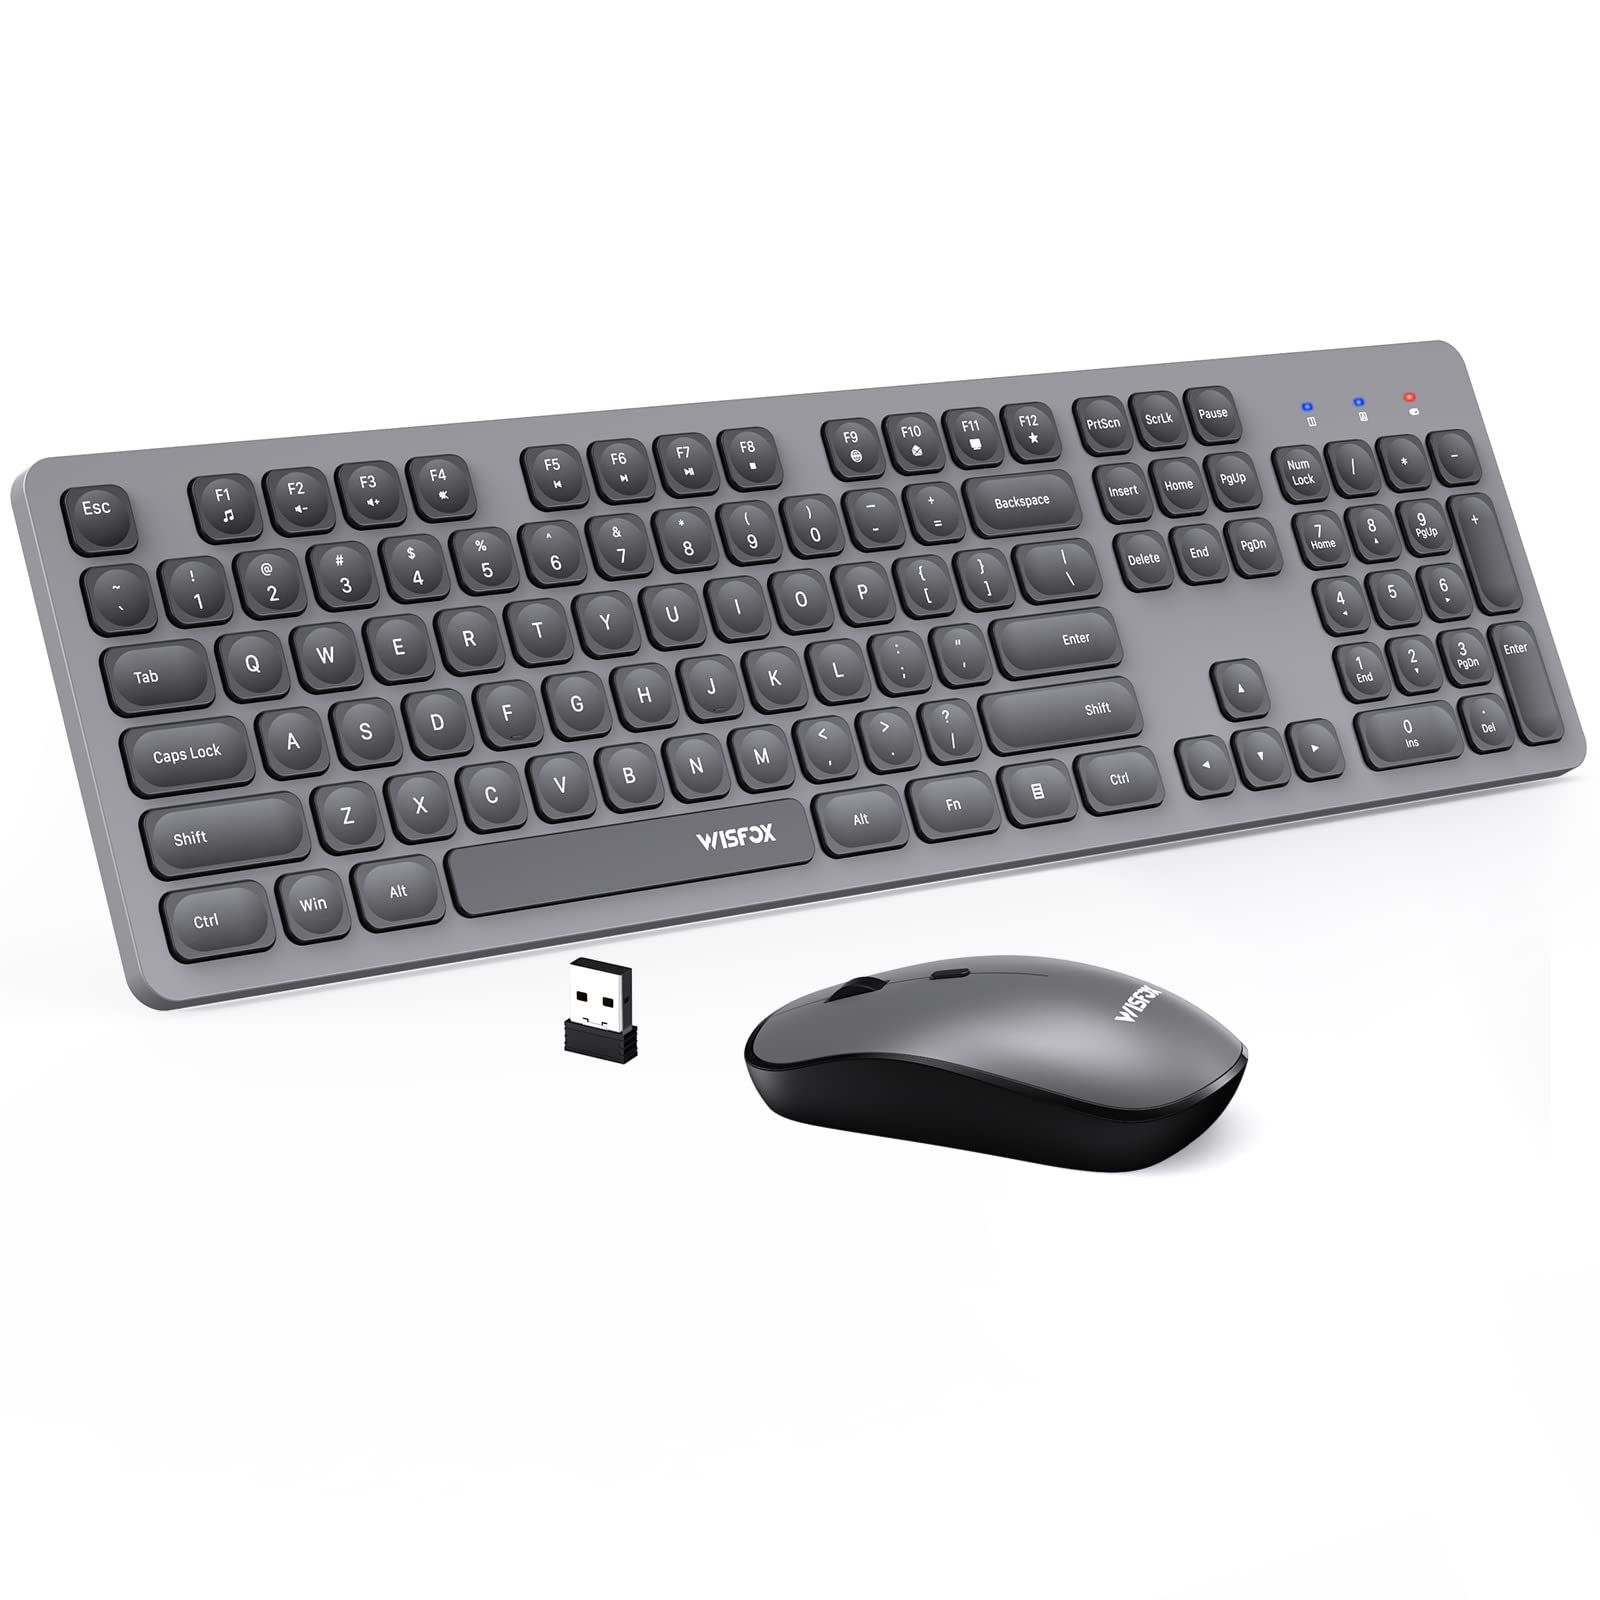 Wireless Keyboard and Mouse Combo, Secure 2.4 GHz Connectivity, Energy Saving, Hot Keys, Flat, Full- | Amazon (US)